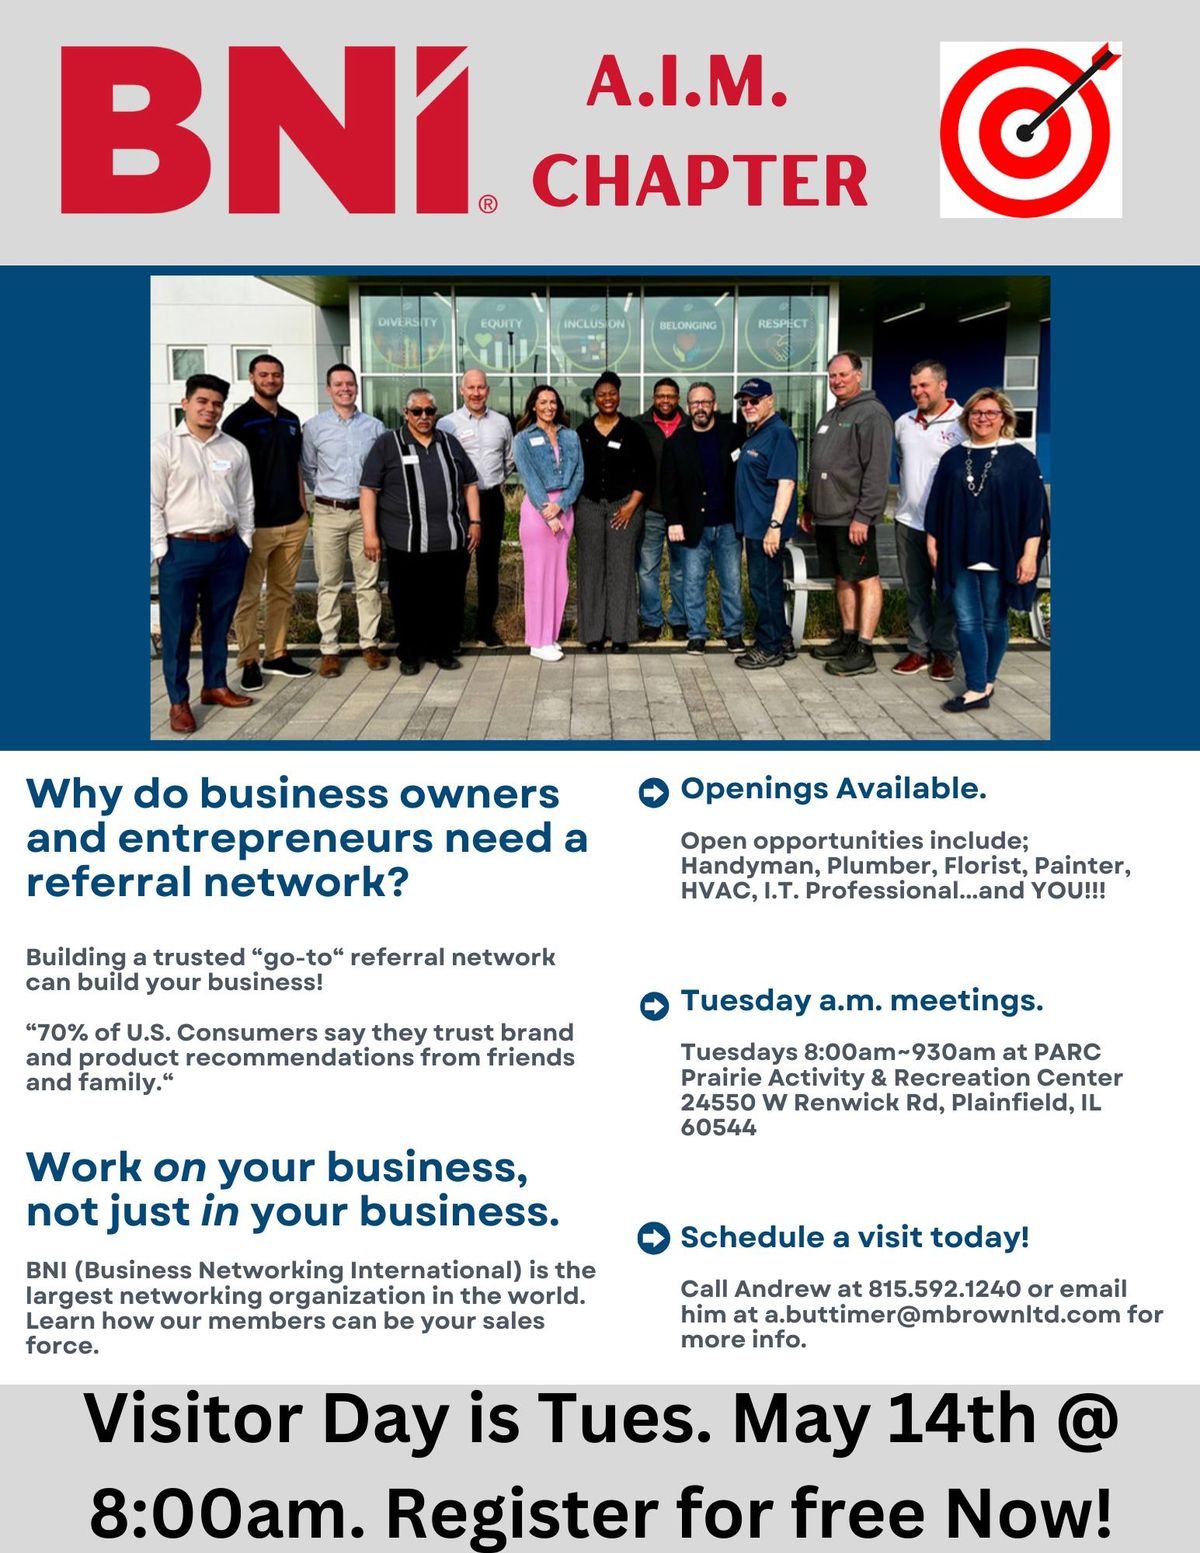 BNI AIM Chapter - Visitor Day